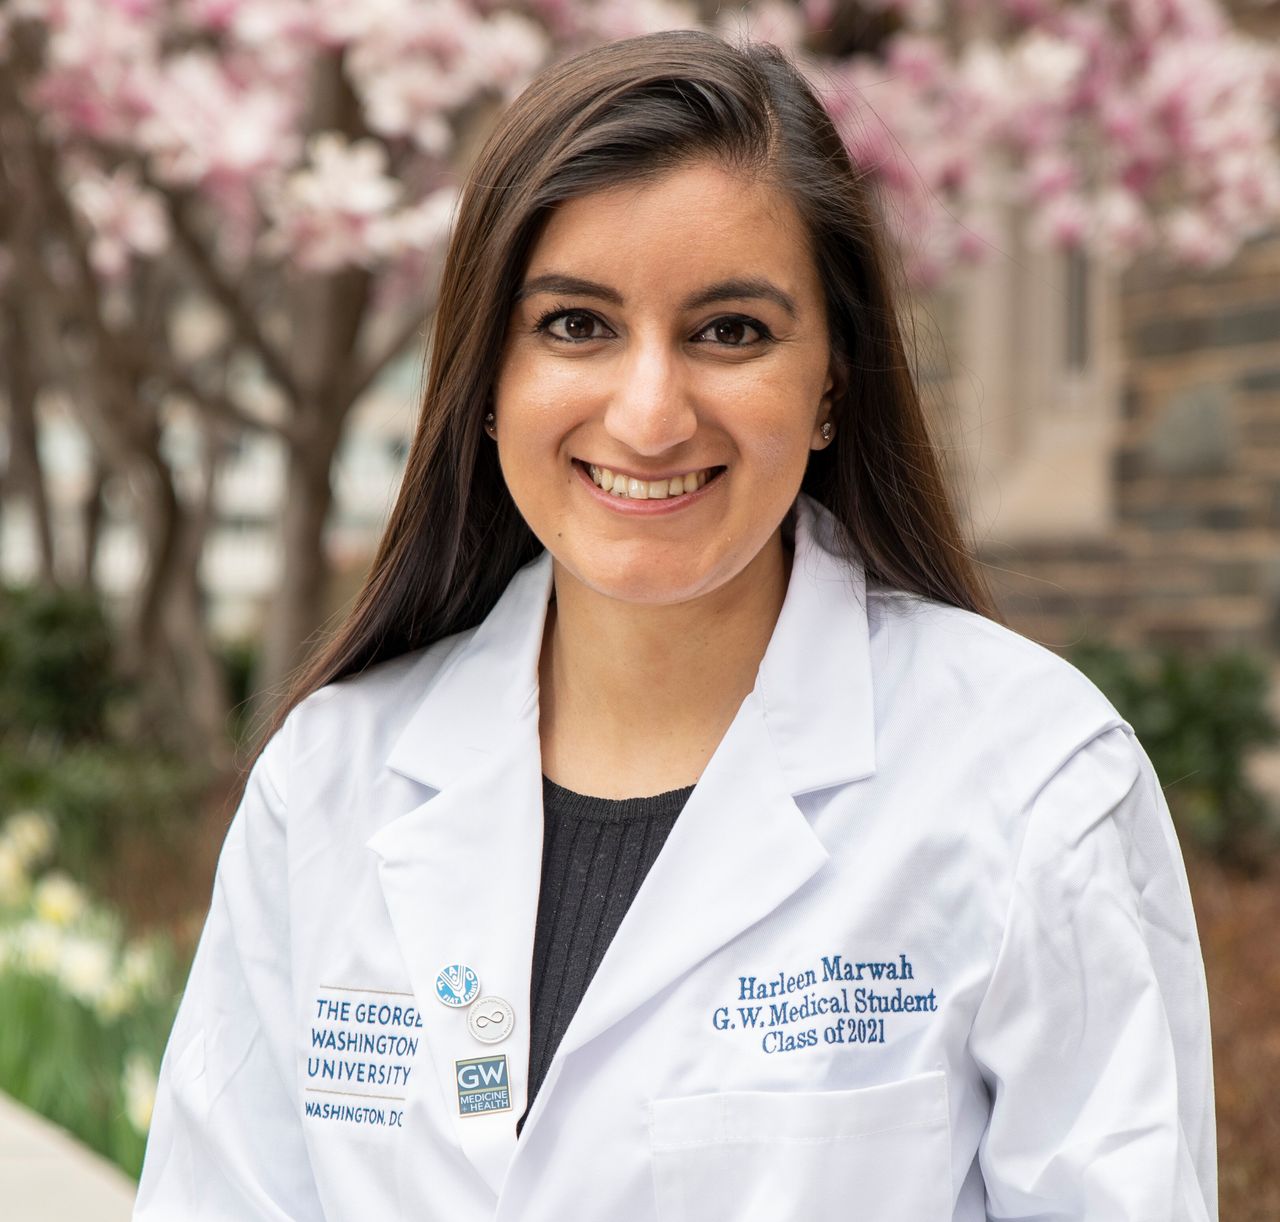 Harleen Marwah, a medical student at George Washington University in Washington, D.C., is leading a volunteer grassroots coalition called Medical Students for a Sustainable Future.